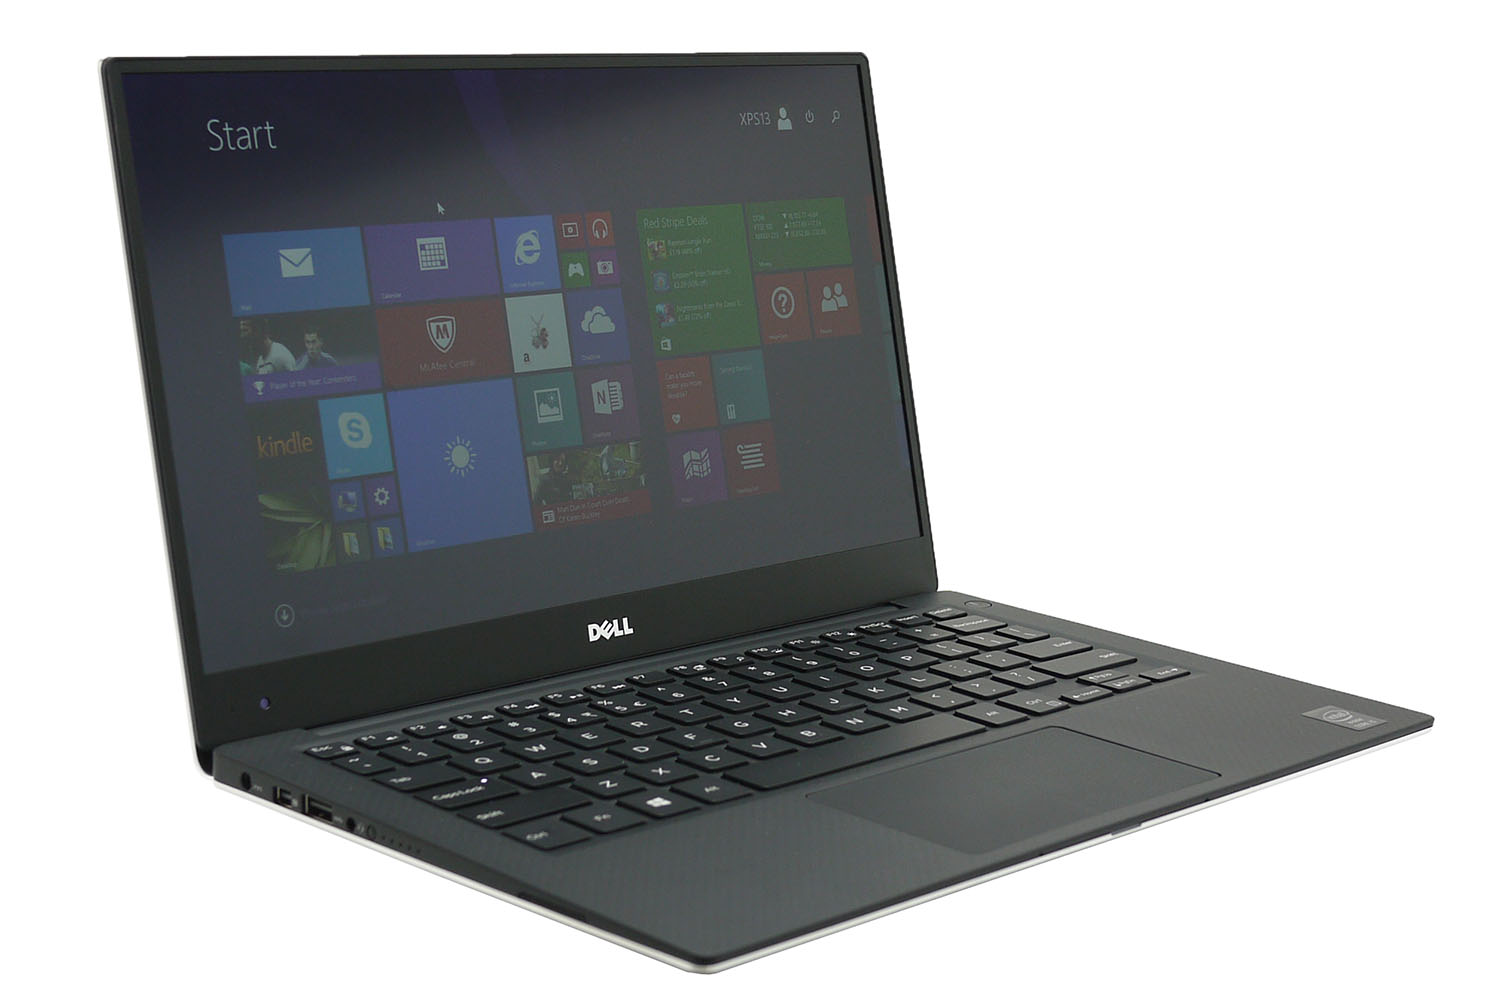 Dell XPS 13 (2015) Review - TechyTalk